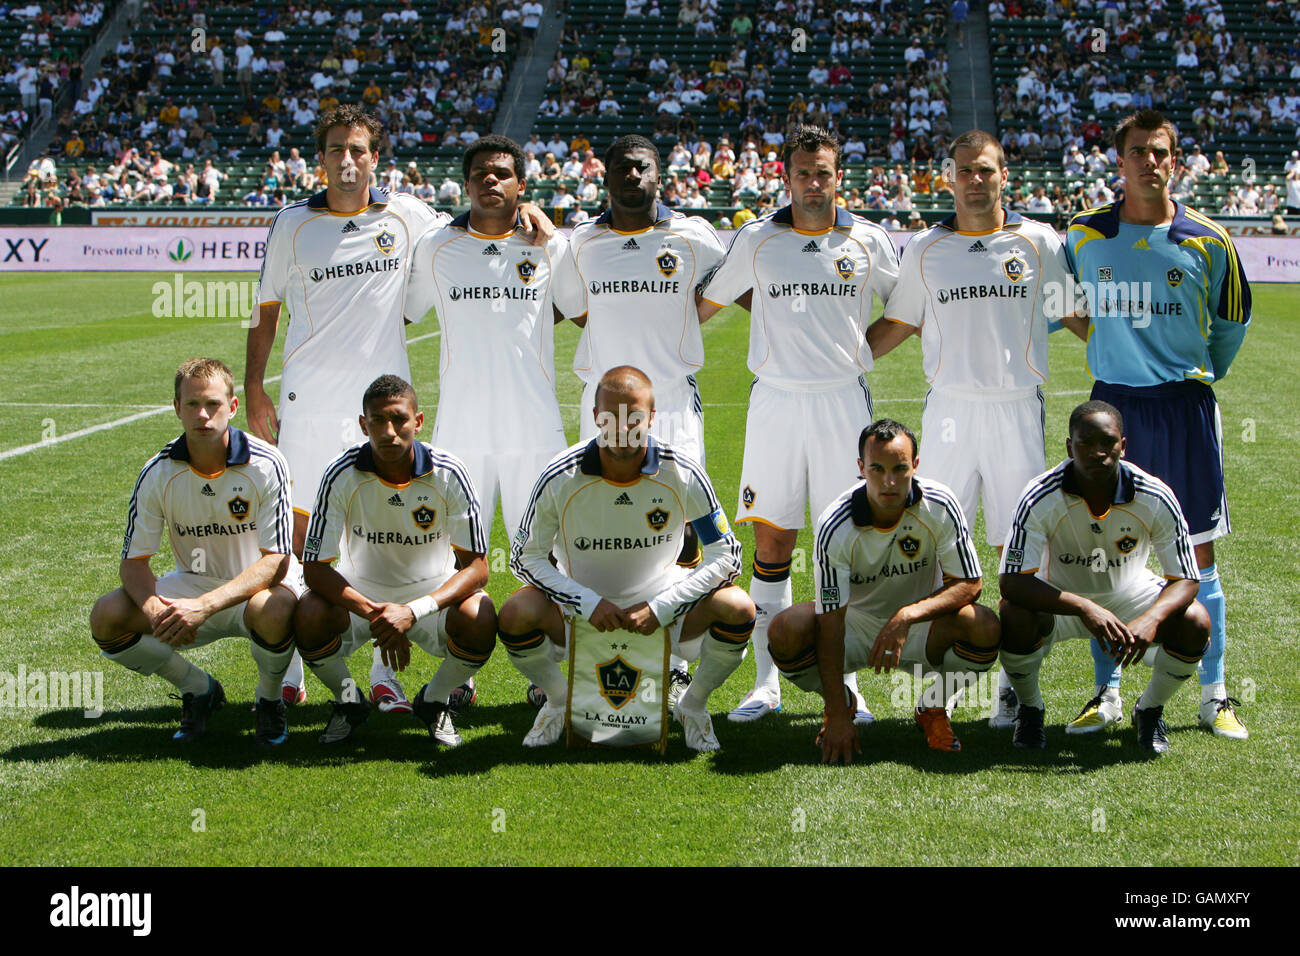 LA Galaxy team group photograph before the Major League Soccer match at the Home Depot Center in Carson, Los Angeles, USA. Stock Photo